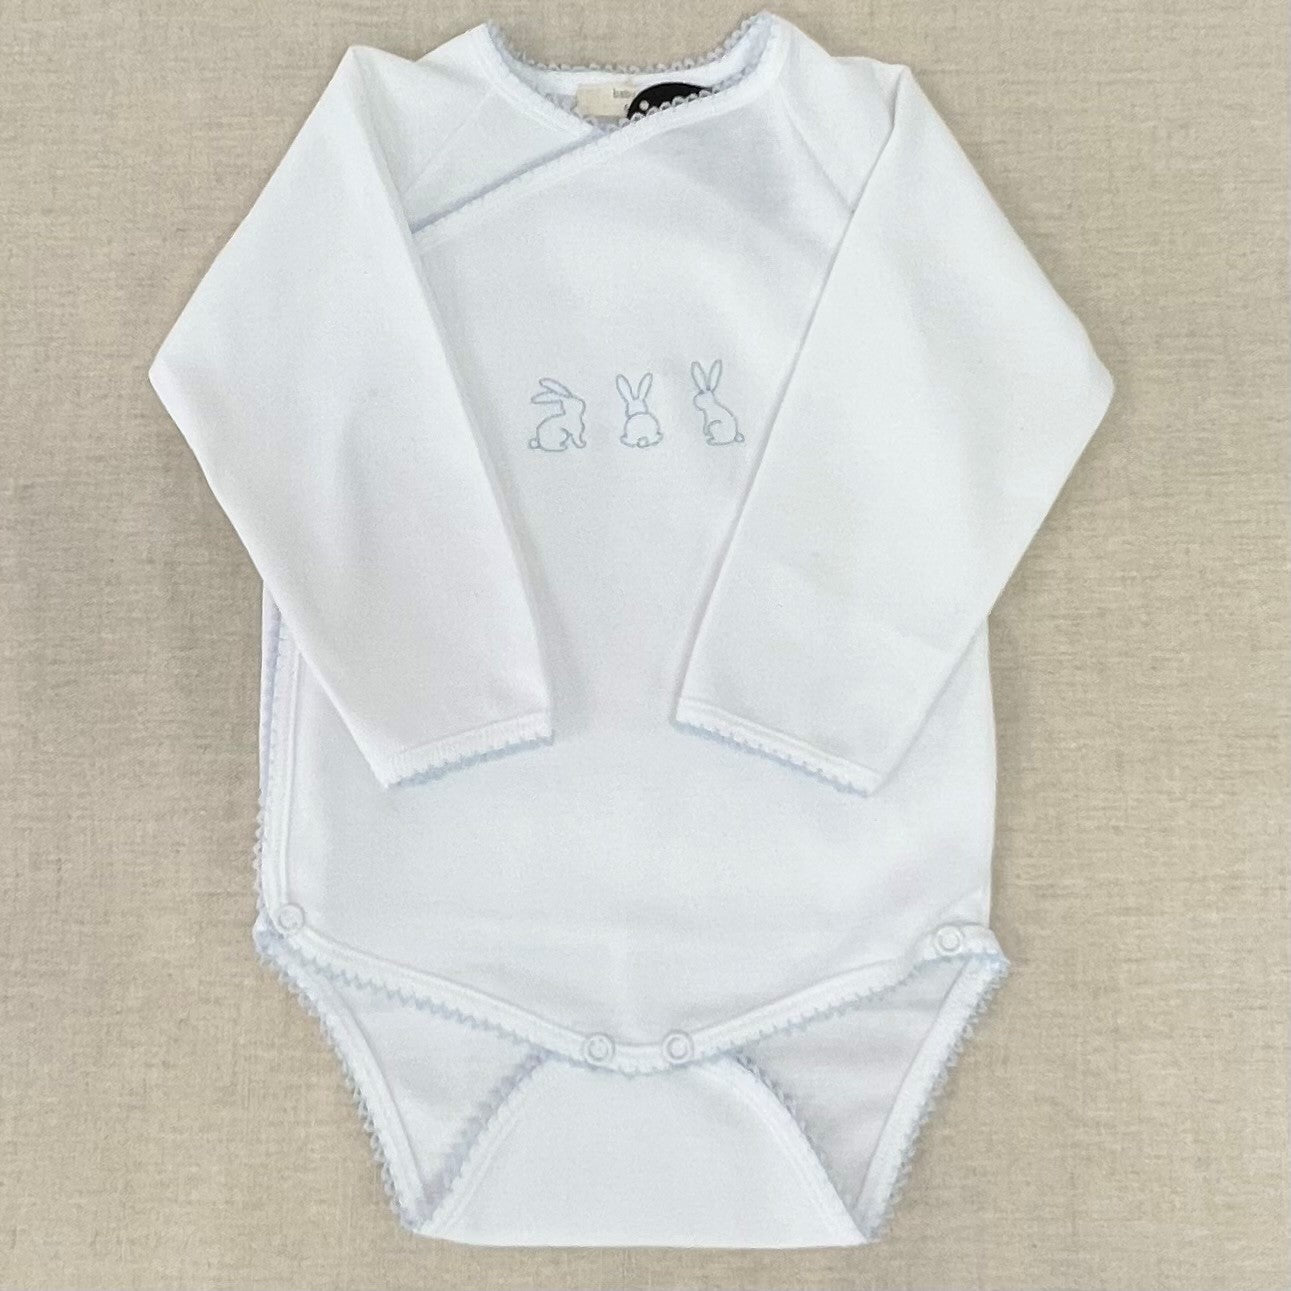 Baby Suit Long White With Blue Embroidery 0-3 months